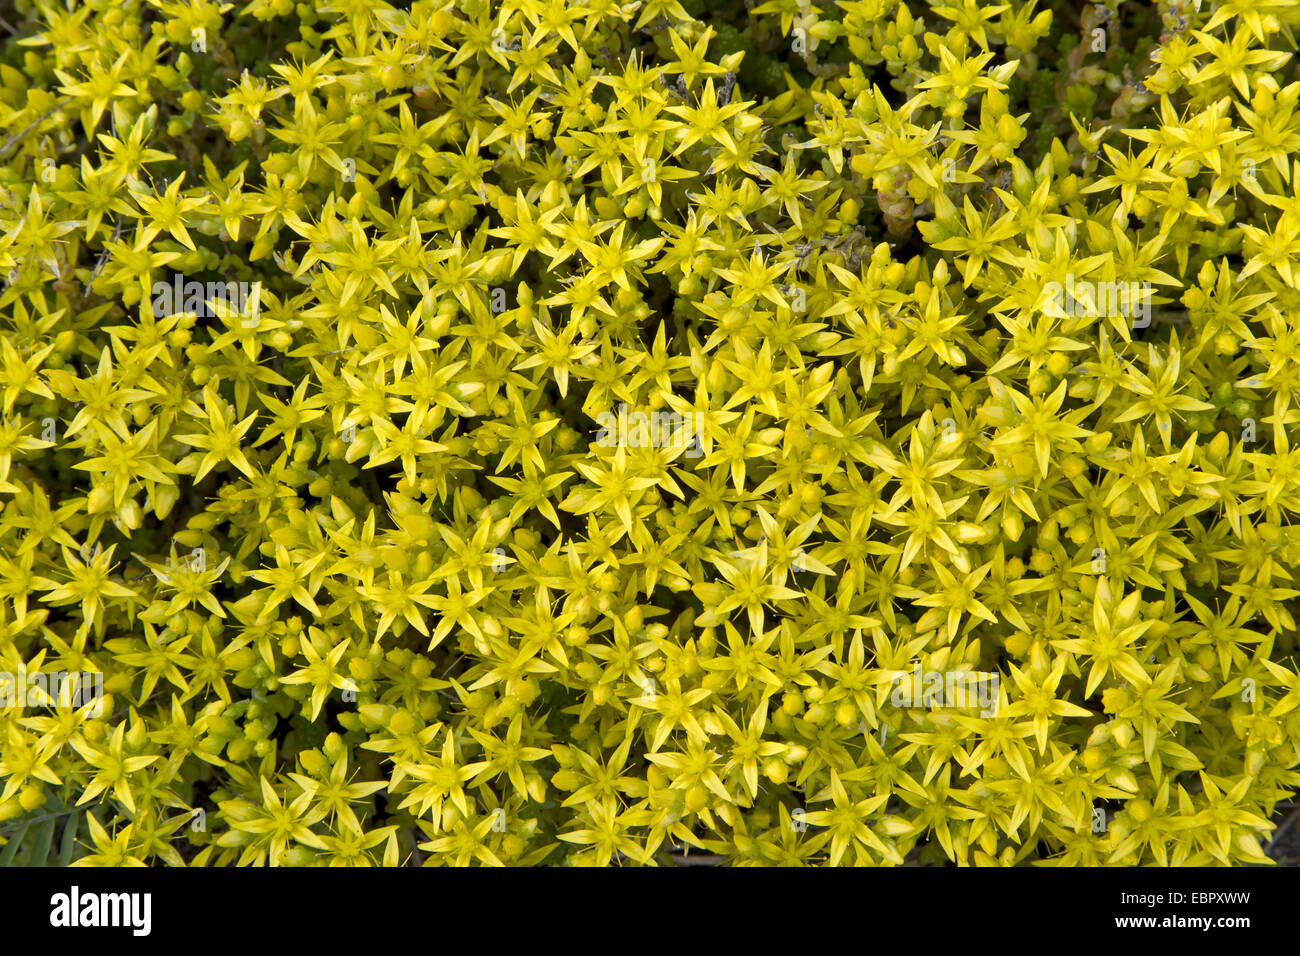 common stonecrop, biting stonecrop, mossy stonecrop, wall-pepper, gold ...